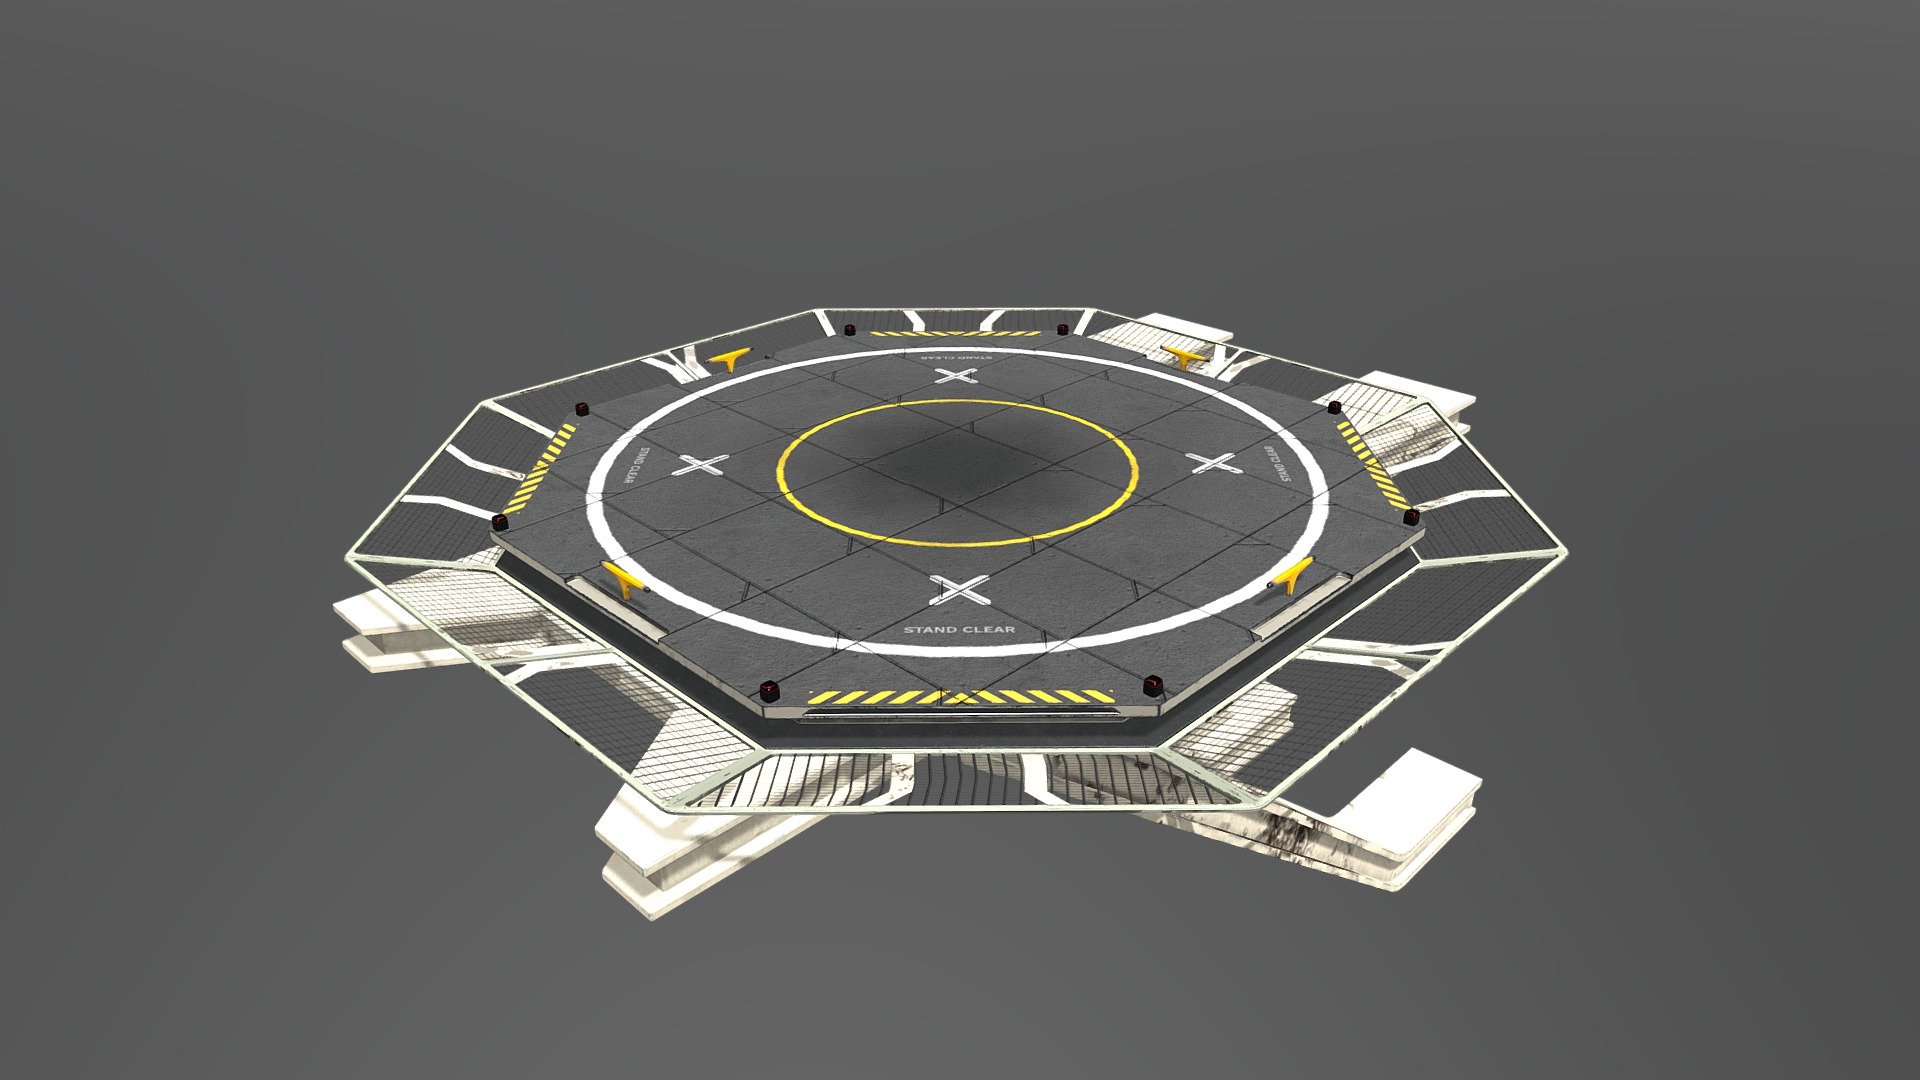 A landing pad I built in multiple pieces. I wanted to get as much detail on the pad itself so I built a full corner and then duplicated it to the full shape 3d model